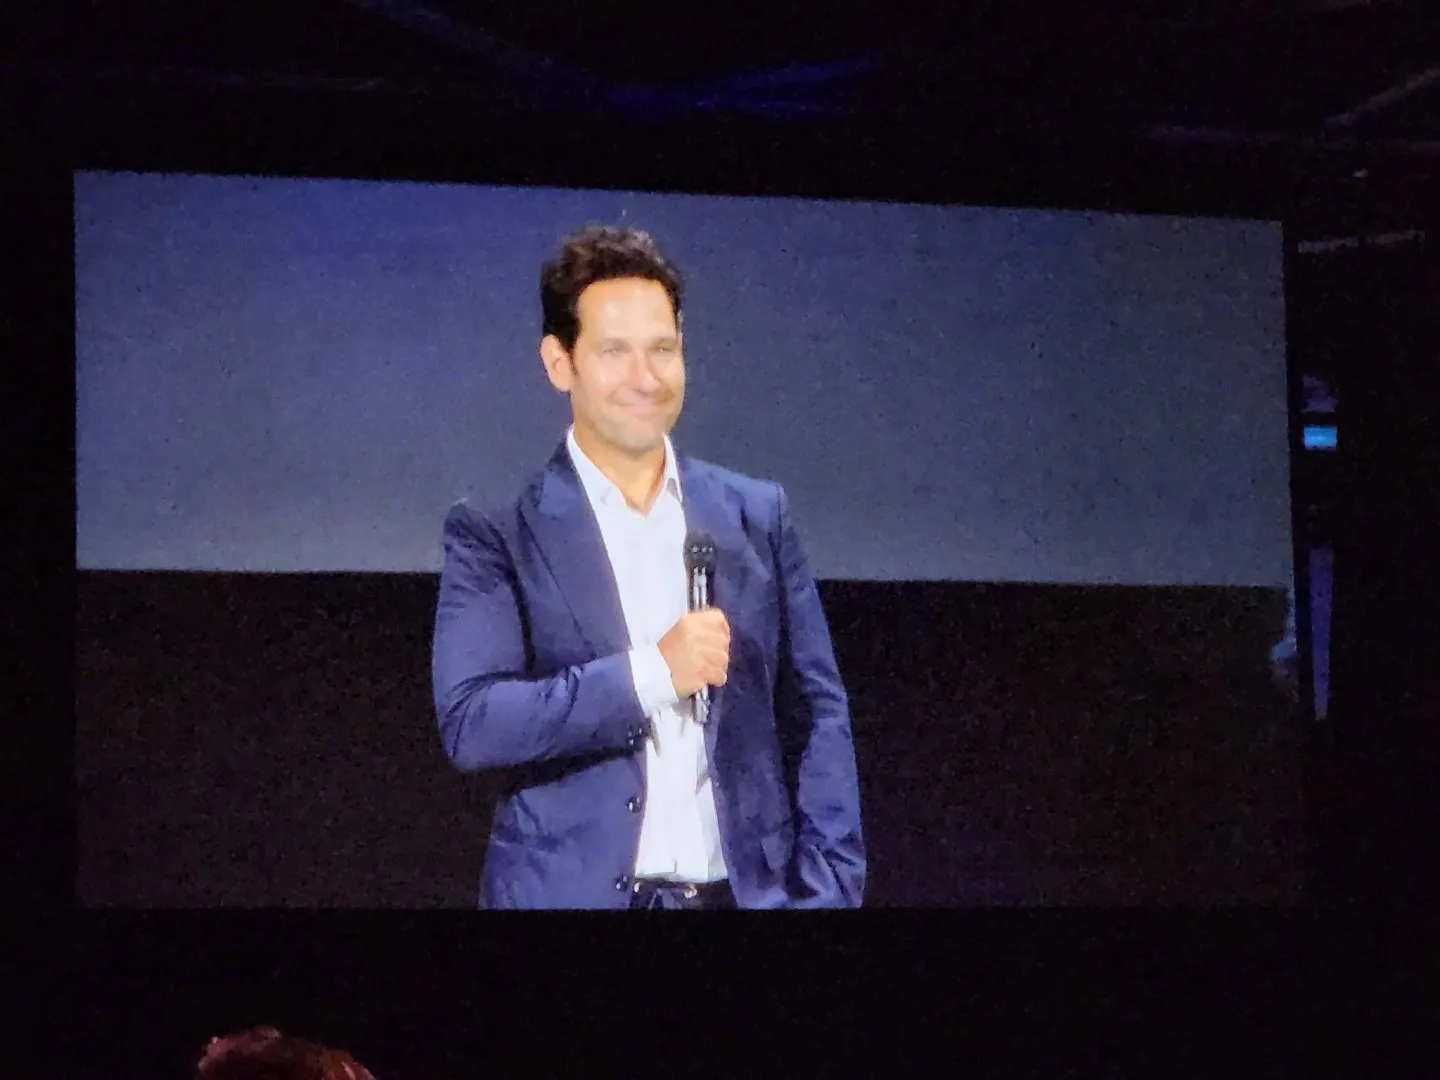 "Ant-Man and the Wasp: Quantumania" crew debuts at D23Expo and broadcasts new clips live | FMV6